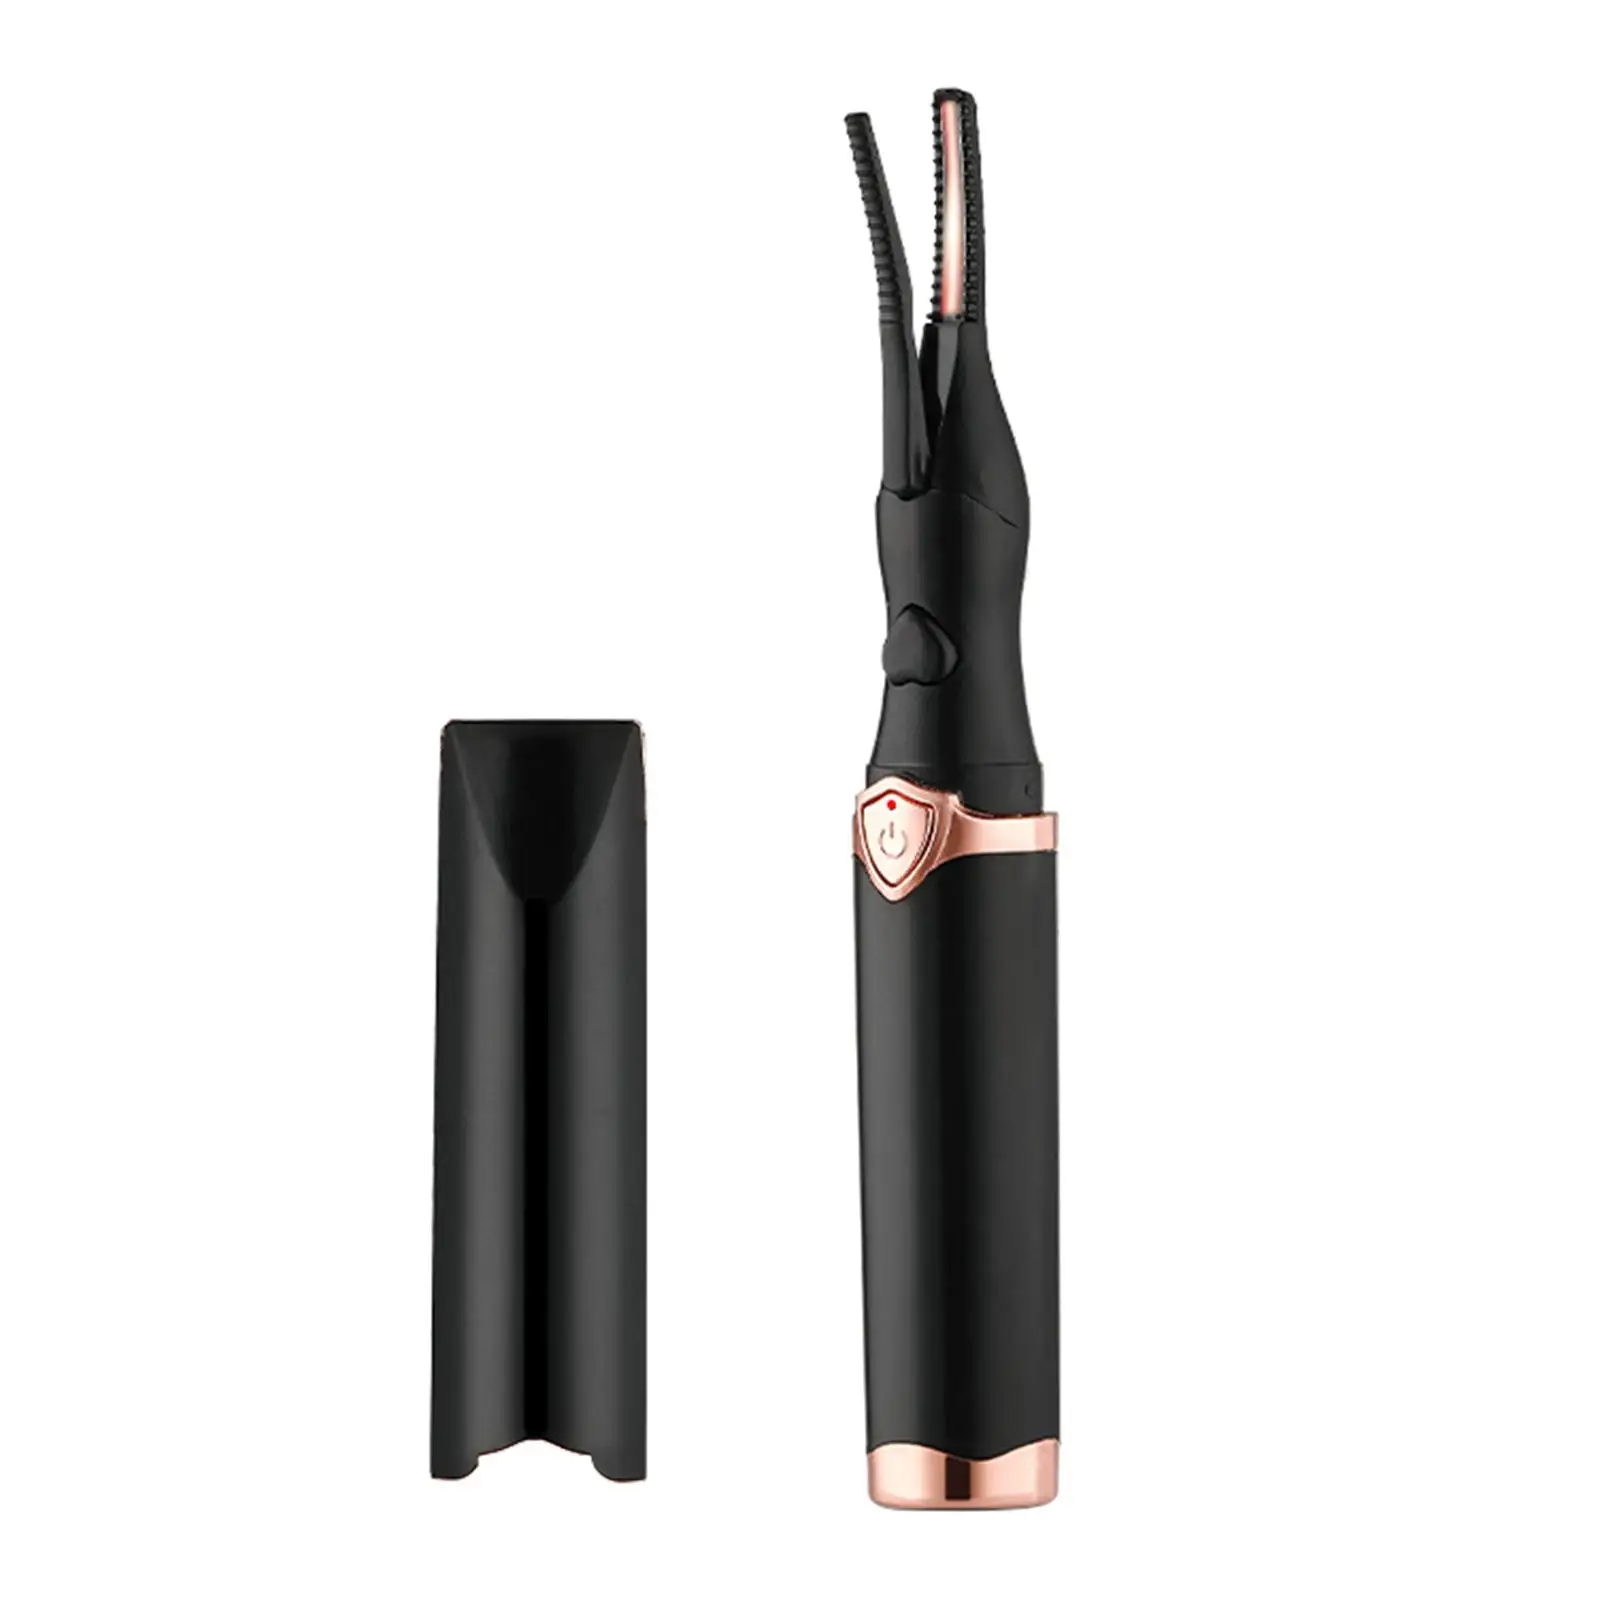 Portable Heated  er Pen Style USB Rechargeable Last for 24H 3 Temperature Modes  ing Effect Women  Tool Lash Styling